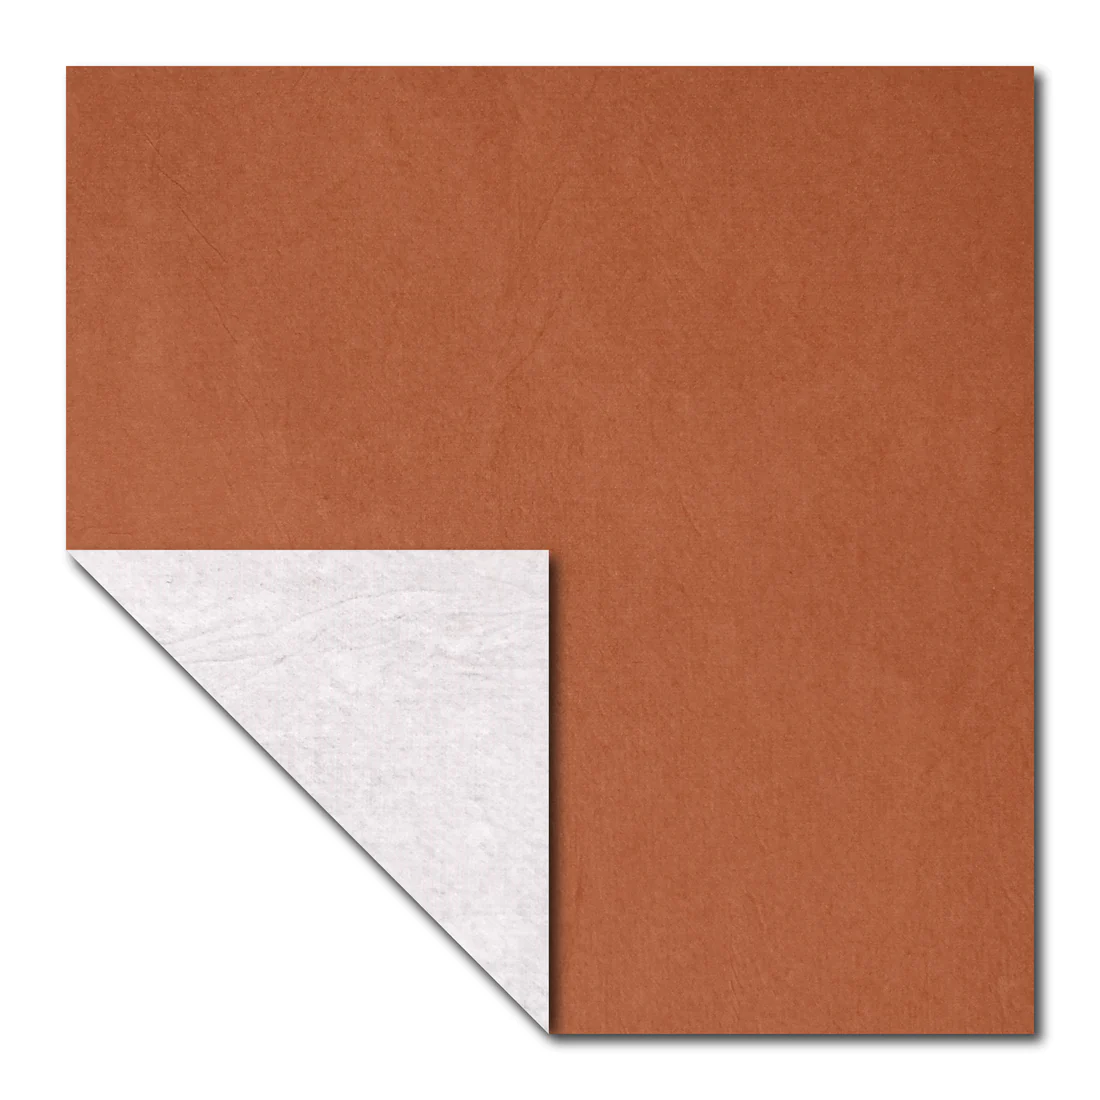 Standard 6 Inch One Sided Single Color (Orange) 50 Sheets (All Same Color)  Square Easy Fold Premium Japanese Paper for Beginner (Made in Japan) -  Taro's Origami Studio E-learning and Shop